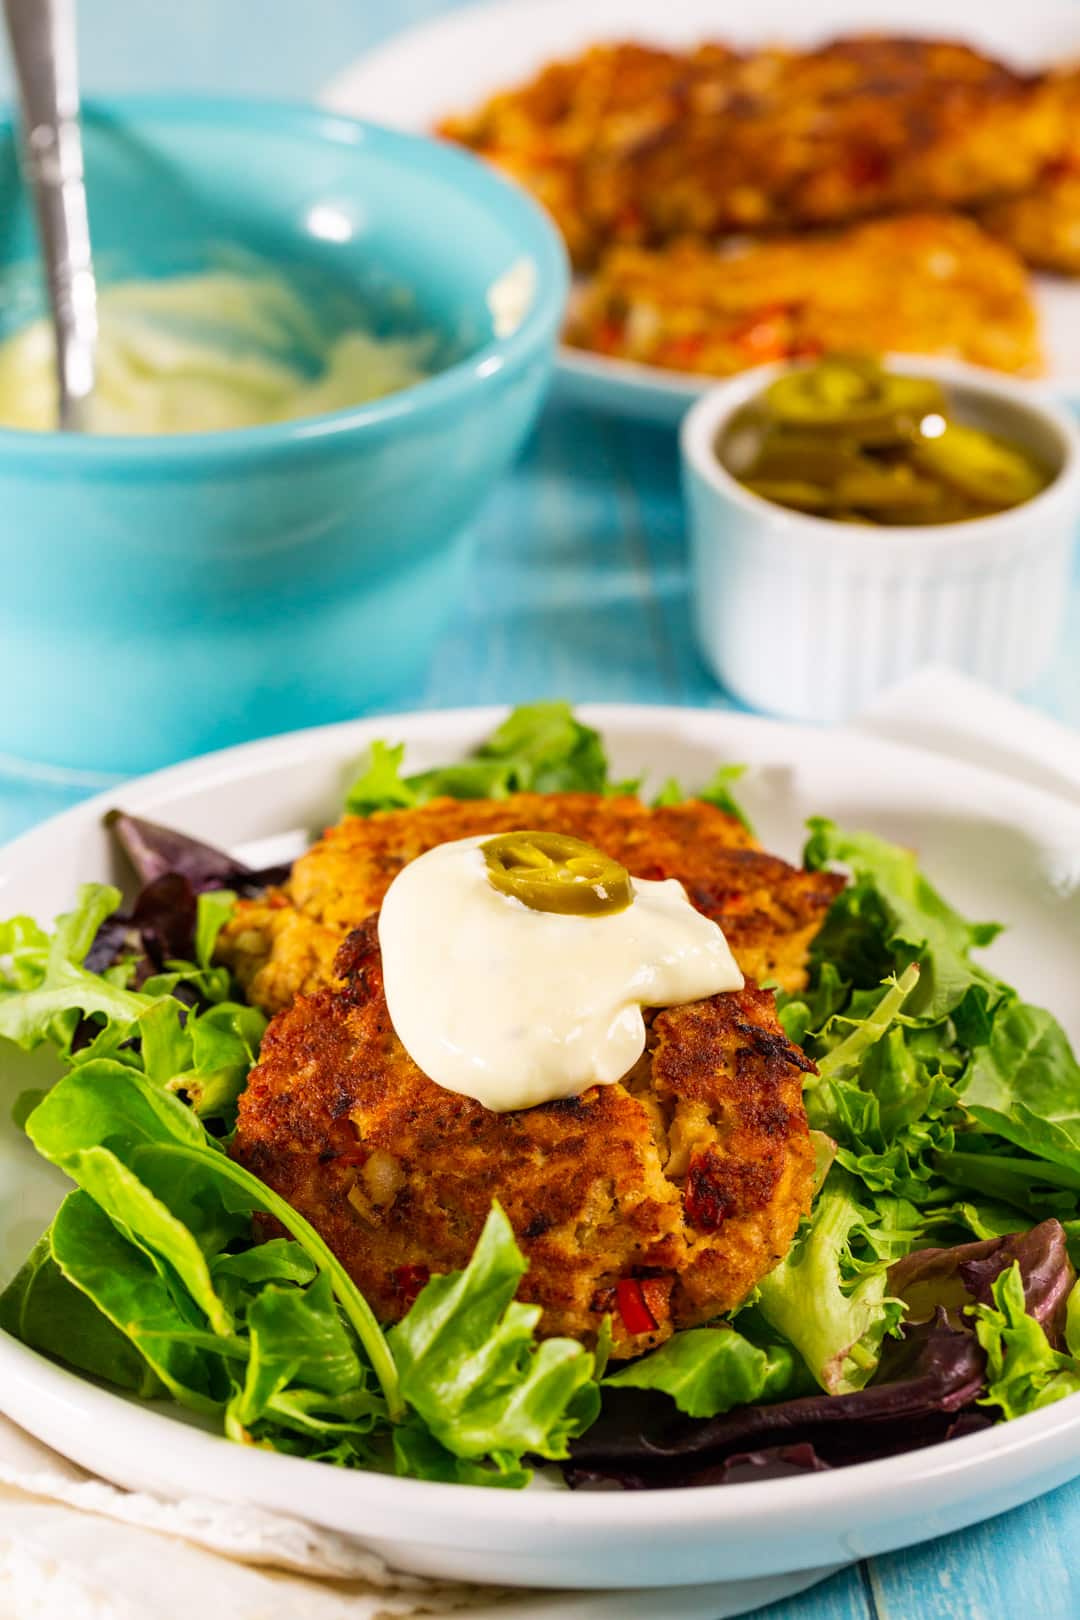 Salmon patties on a bed of mixed greens